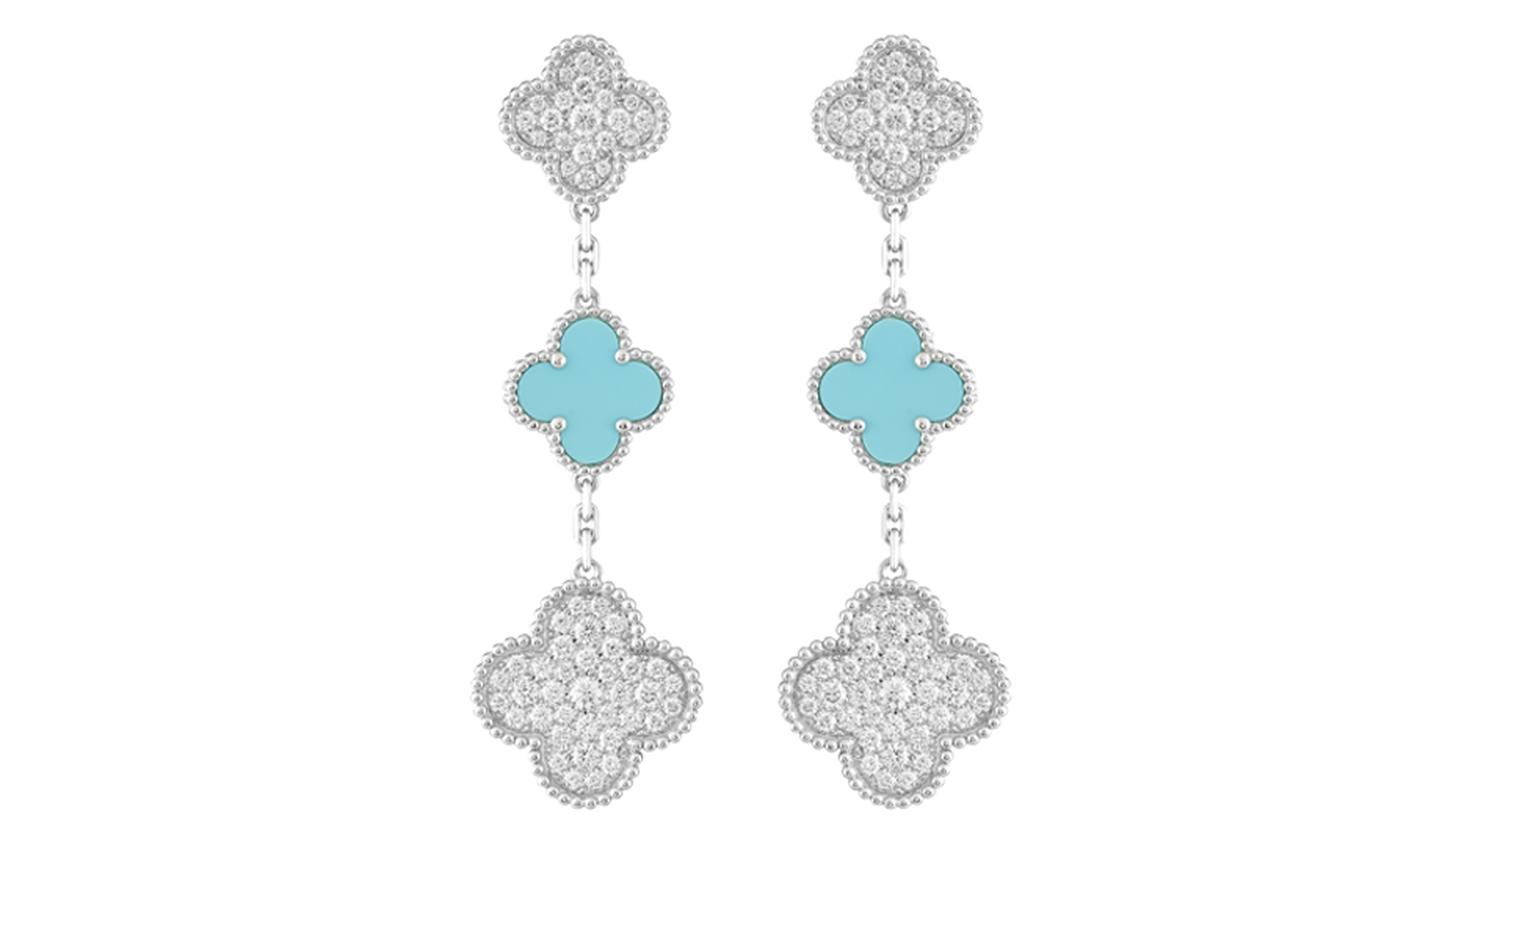 Limited Edition Princess Charlene Alhambra earclips, white gold, diamonds (3.4 cts) and turquoise. Price from 28 300 €